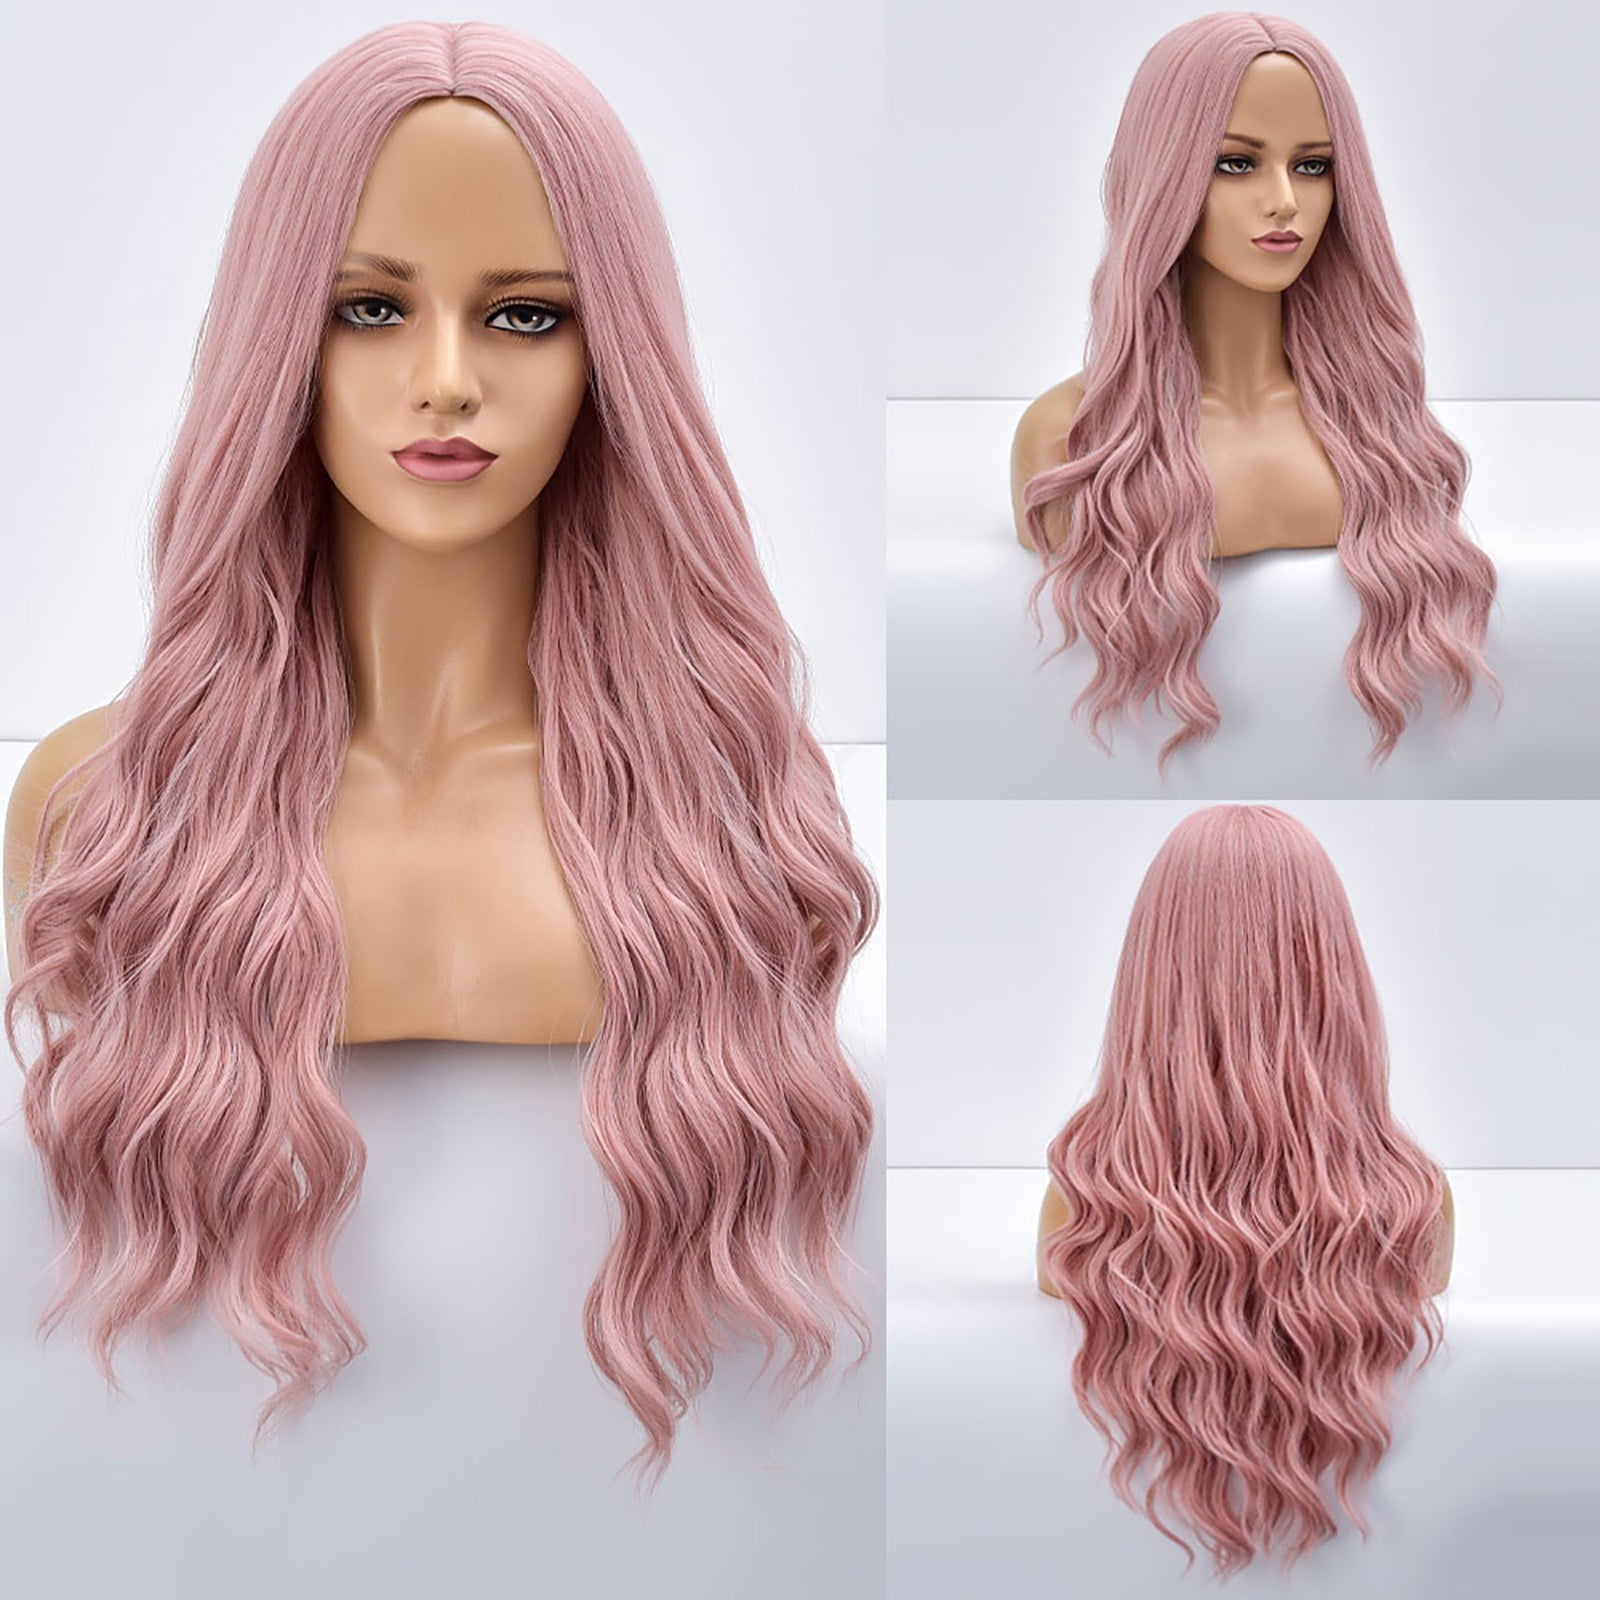 DOPI Medium-length Curly Hair Pink Wave Female Wig, Natural Wave Wig  Synthetic